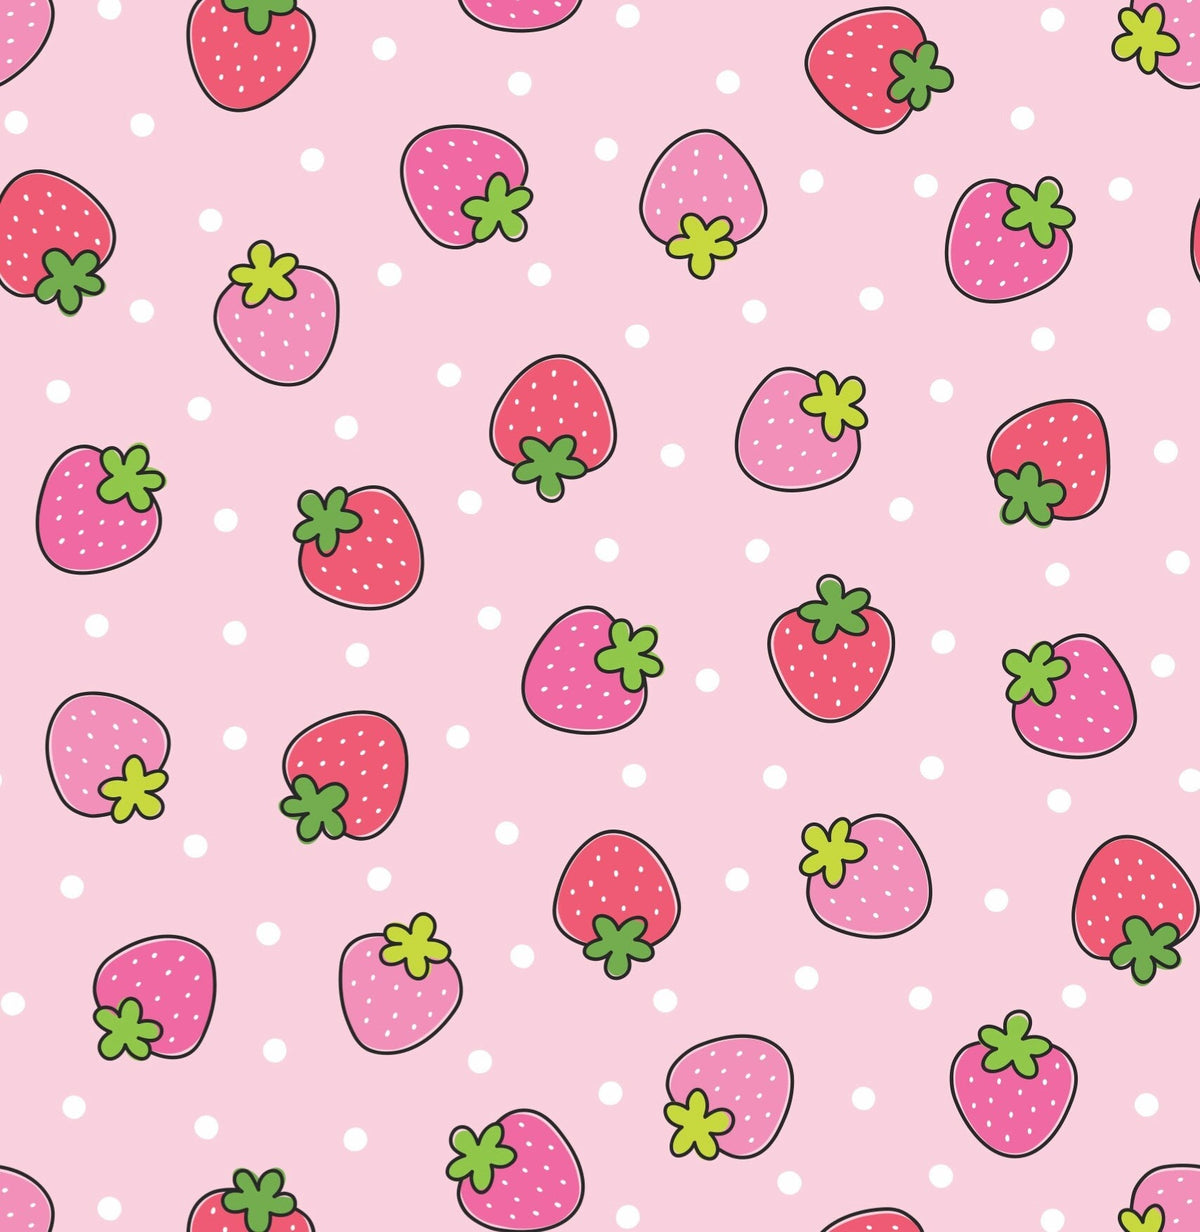 Strawberry Gift Wrapping Paper Sheet (PACK OF 3) - Birthday, Christmas,  Anniversary, Wedding